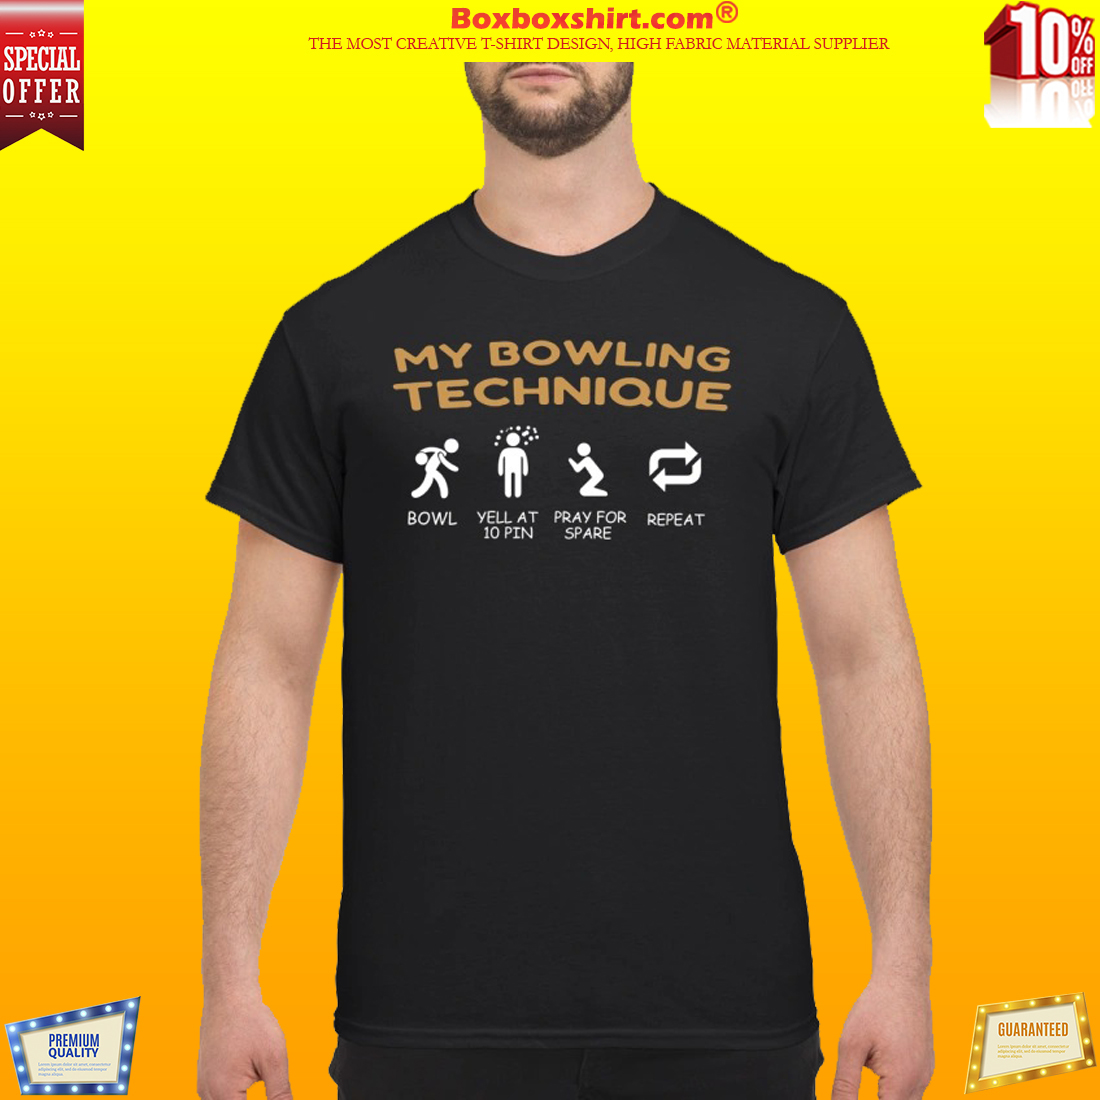 My bowling technique bowl yell at 10 pin classic shirt